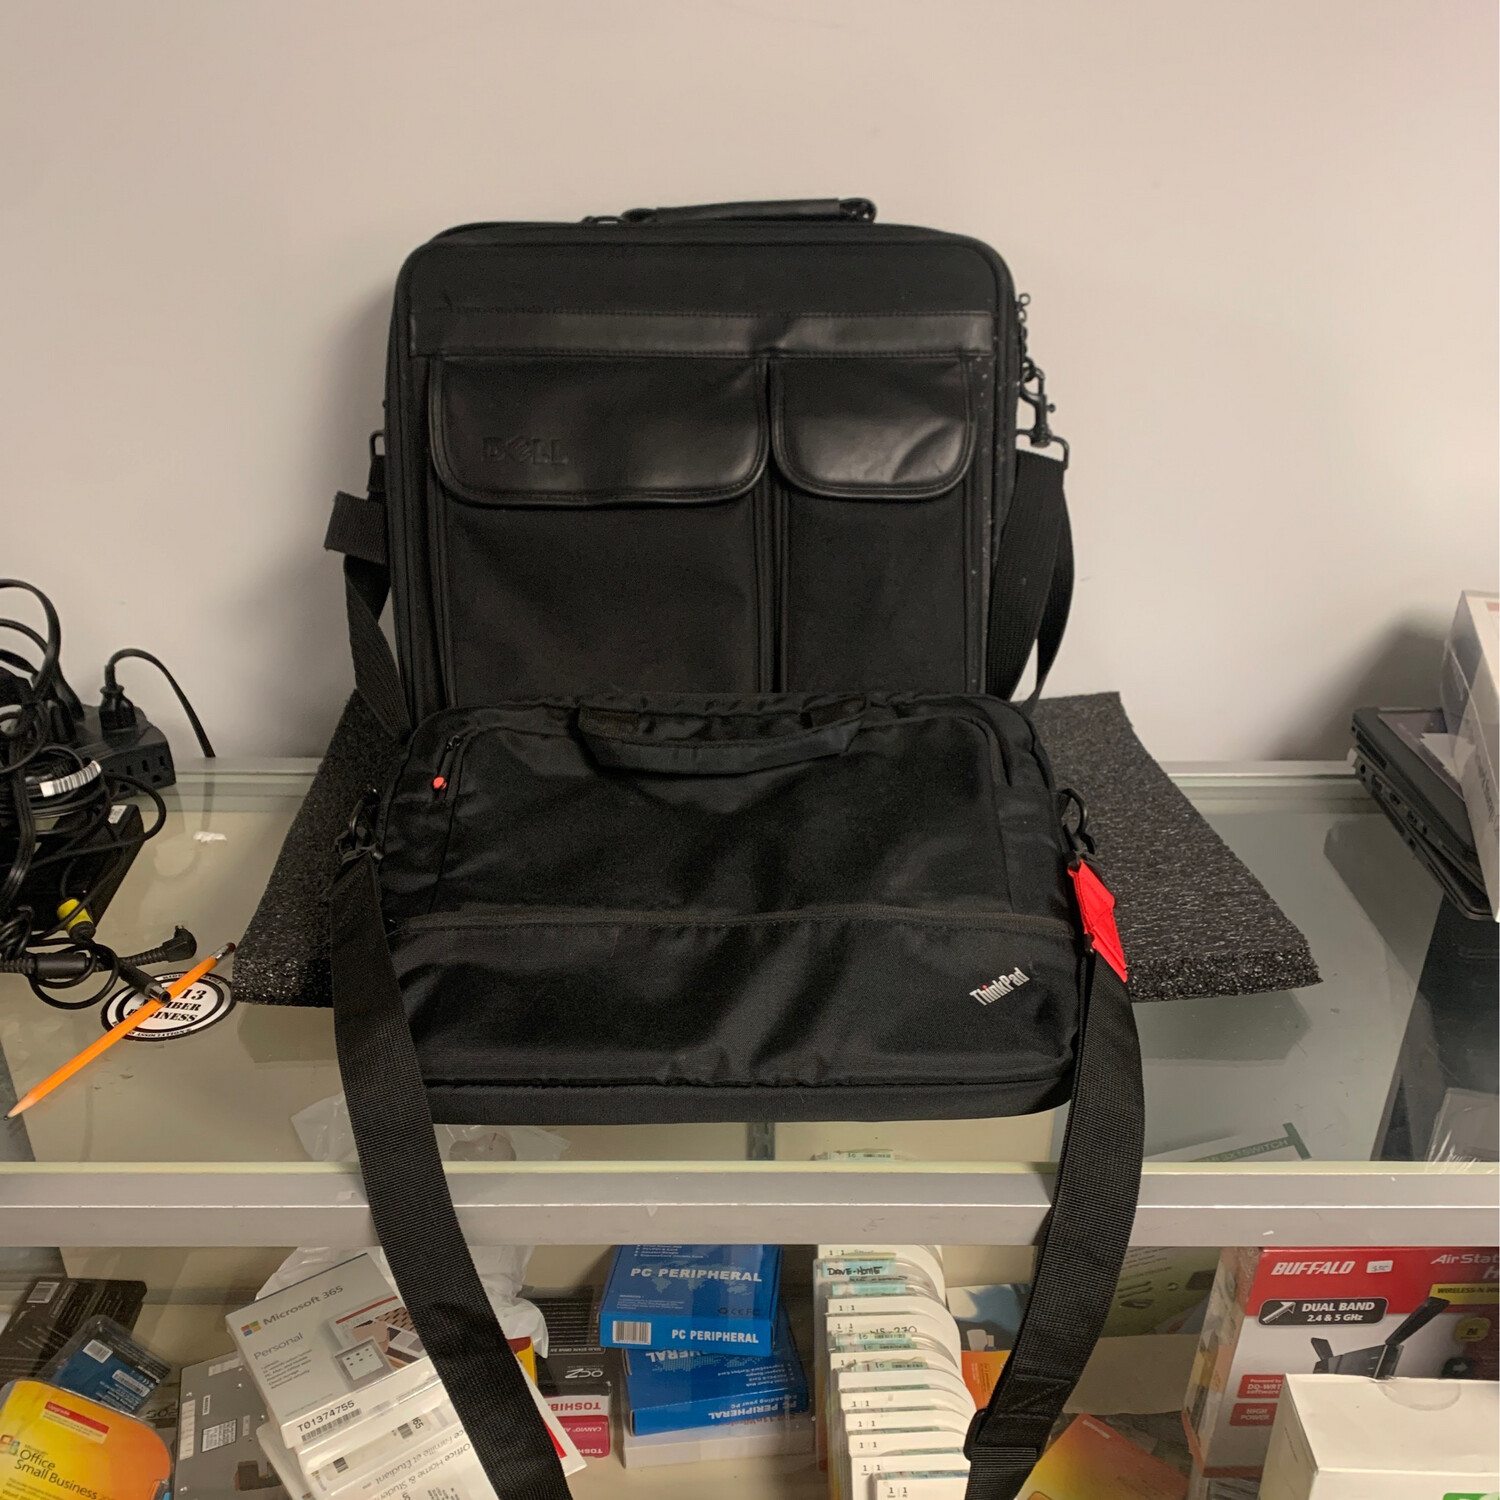 Grade C Laptop Bags - Many Different Size And Brands In Stock